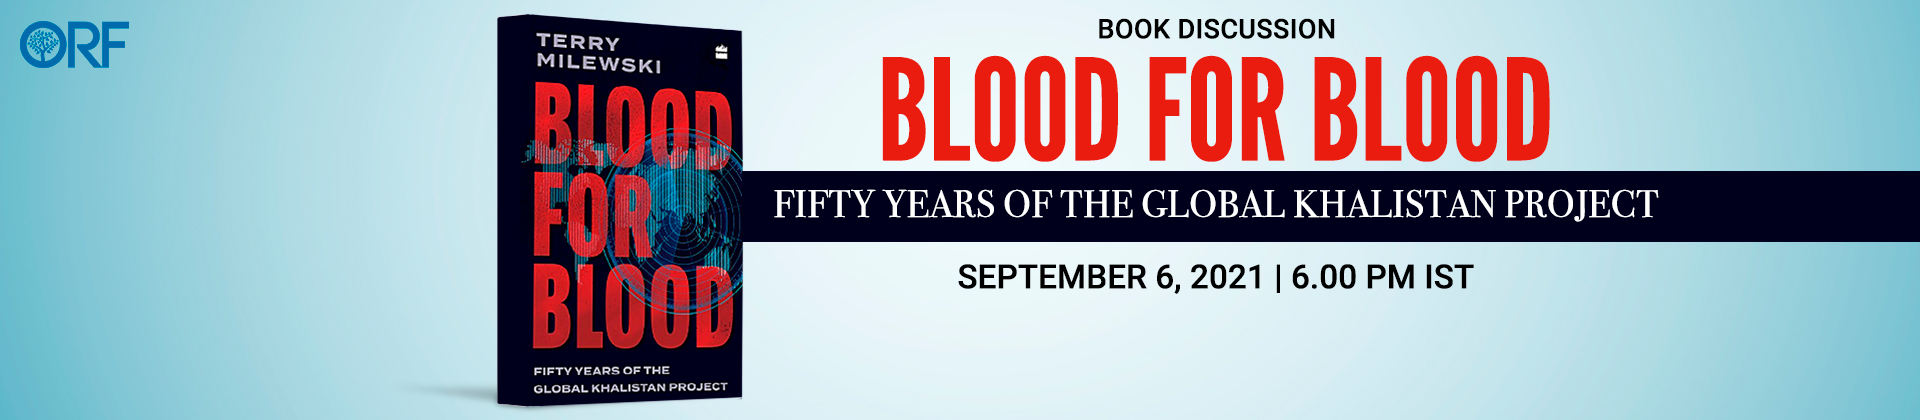 Book Discussion | Blood for Blood: Fifty Years of the Global Khalistan Project